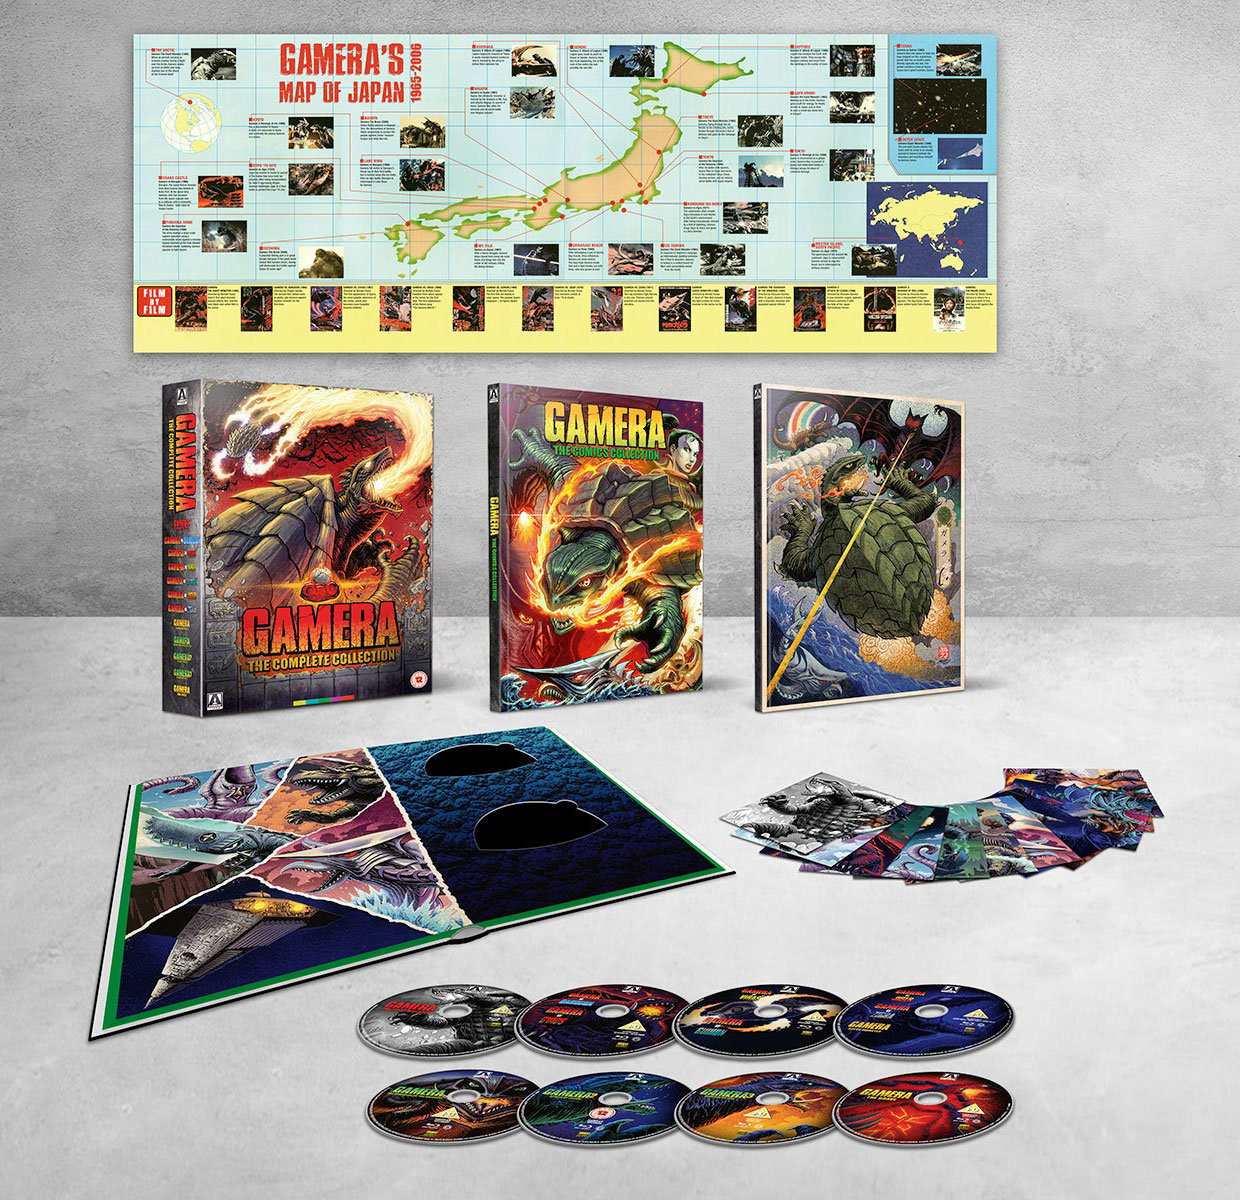 Gamera: The Complete Collection